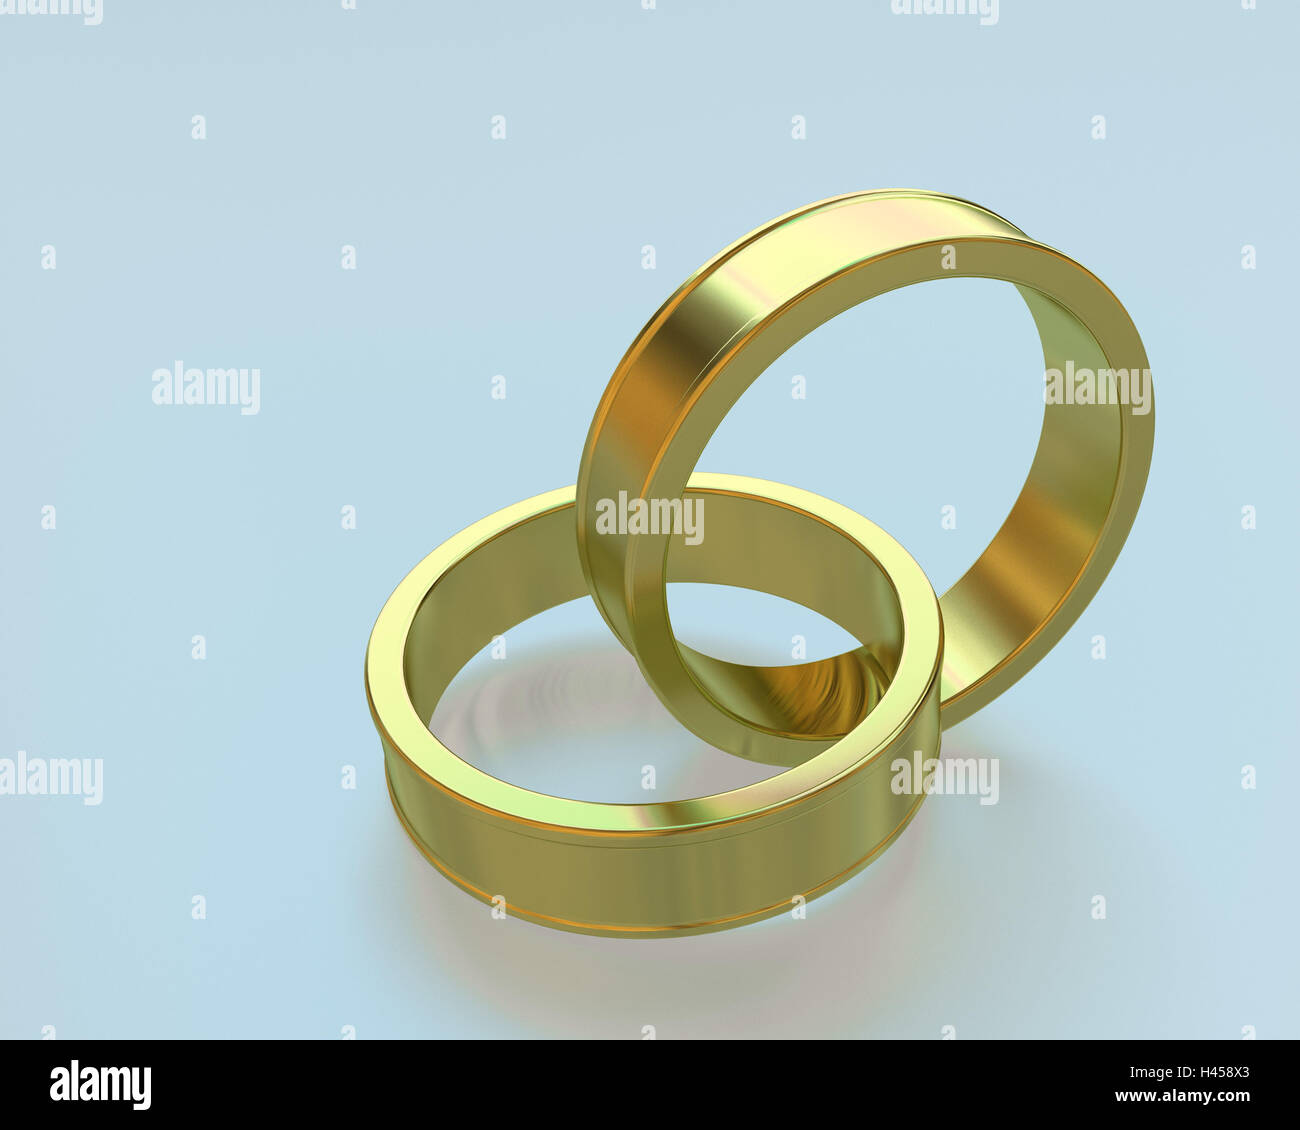 Soon Inge, gold, connected, two, wedding, rings, gold rings, golden, weak,  wedding rings, symbol, concept, marriage, marriage, Ehevertrag, insoluble,  compulsory community, wedding, solidarity, marriage, partnership, future,  luck, mutuality, jewelry ...